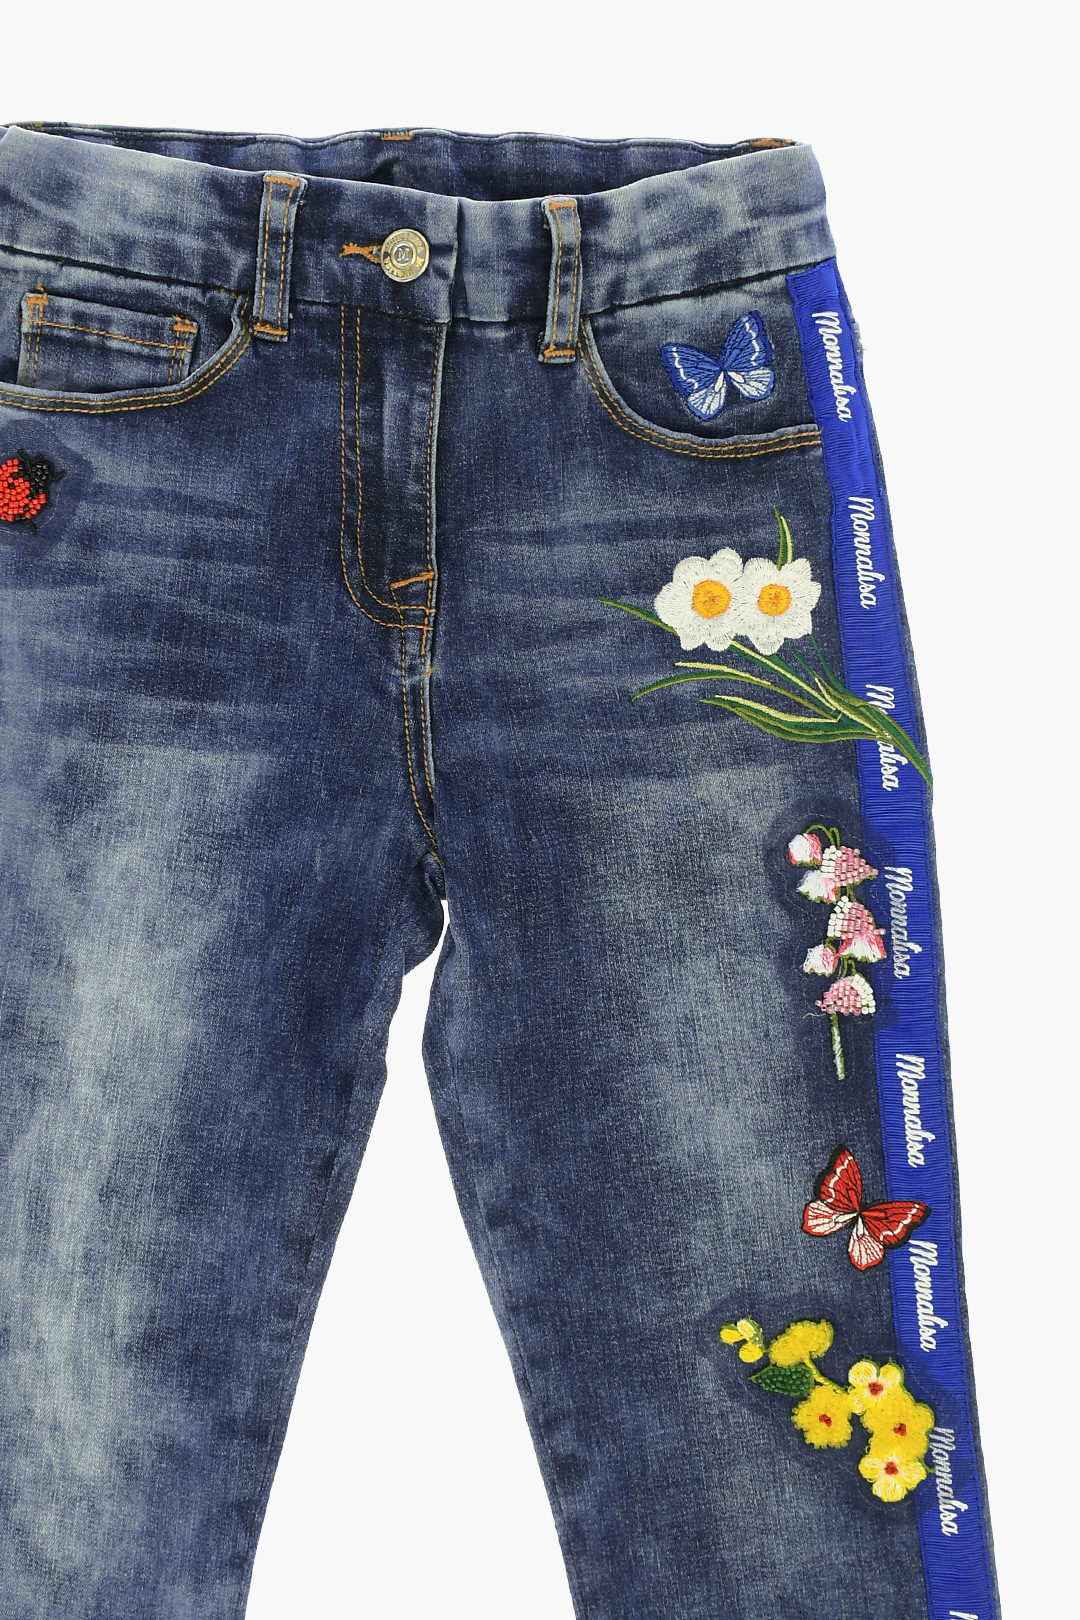 Monnalisa Floral Embroidered Jeans 여자 아동 - Glamood Outlet